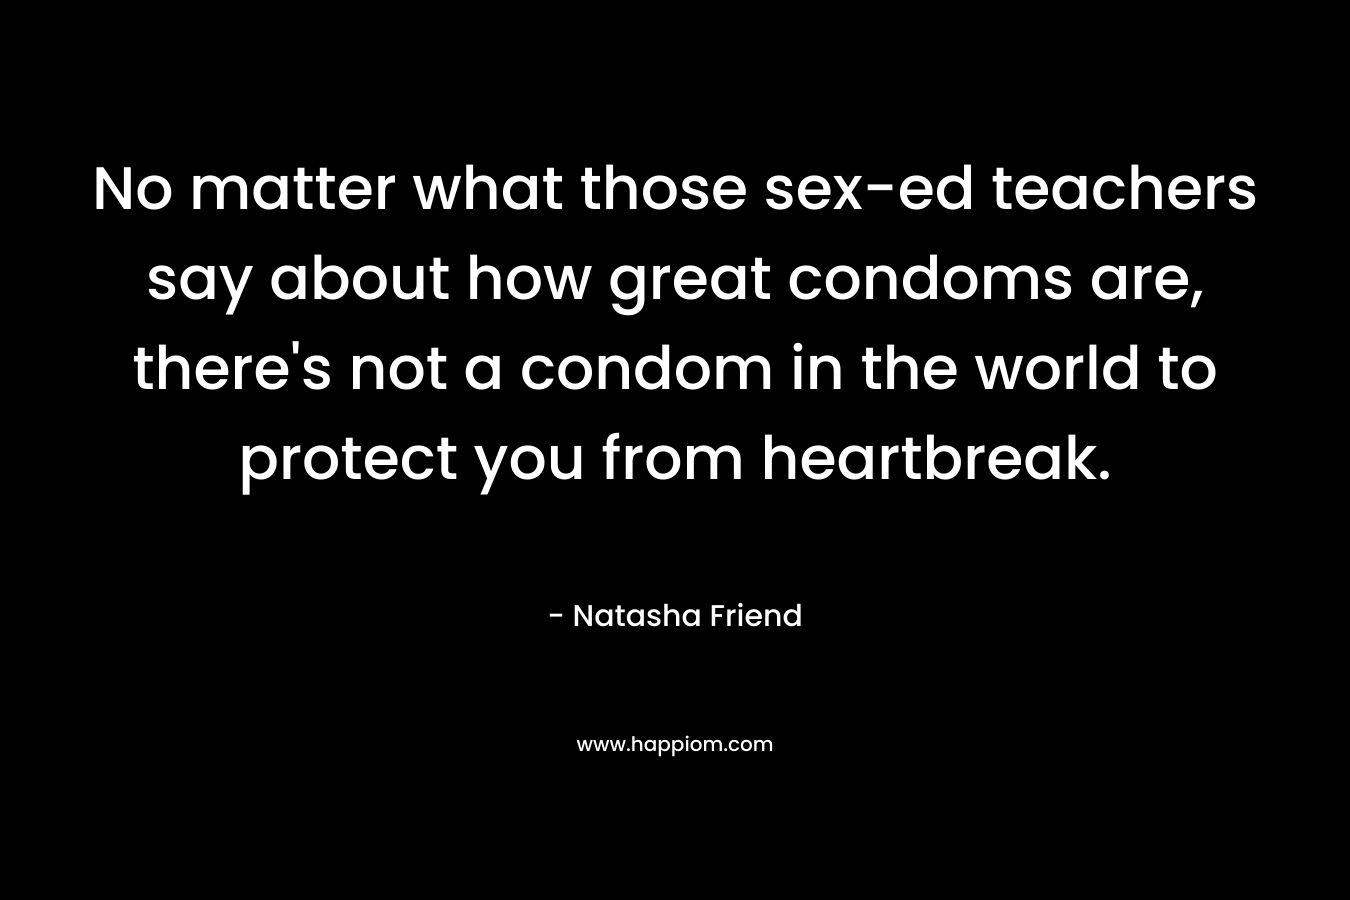 No matter what those sex-ed teachers say about how great condoms are, there’s not a condom in the world to protect you from heartbreak. – Natasha Friend